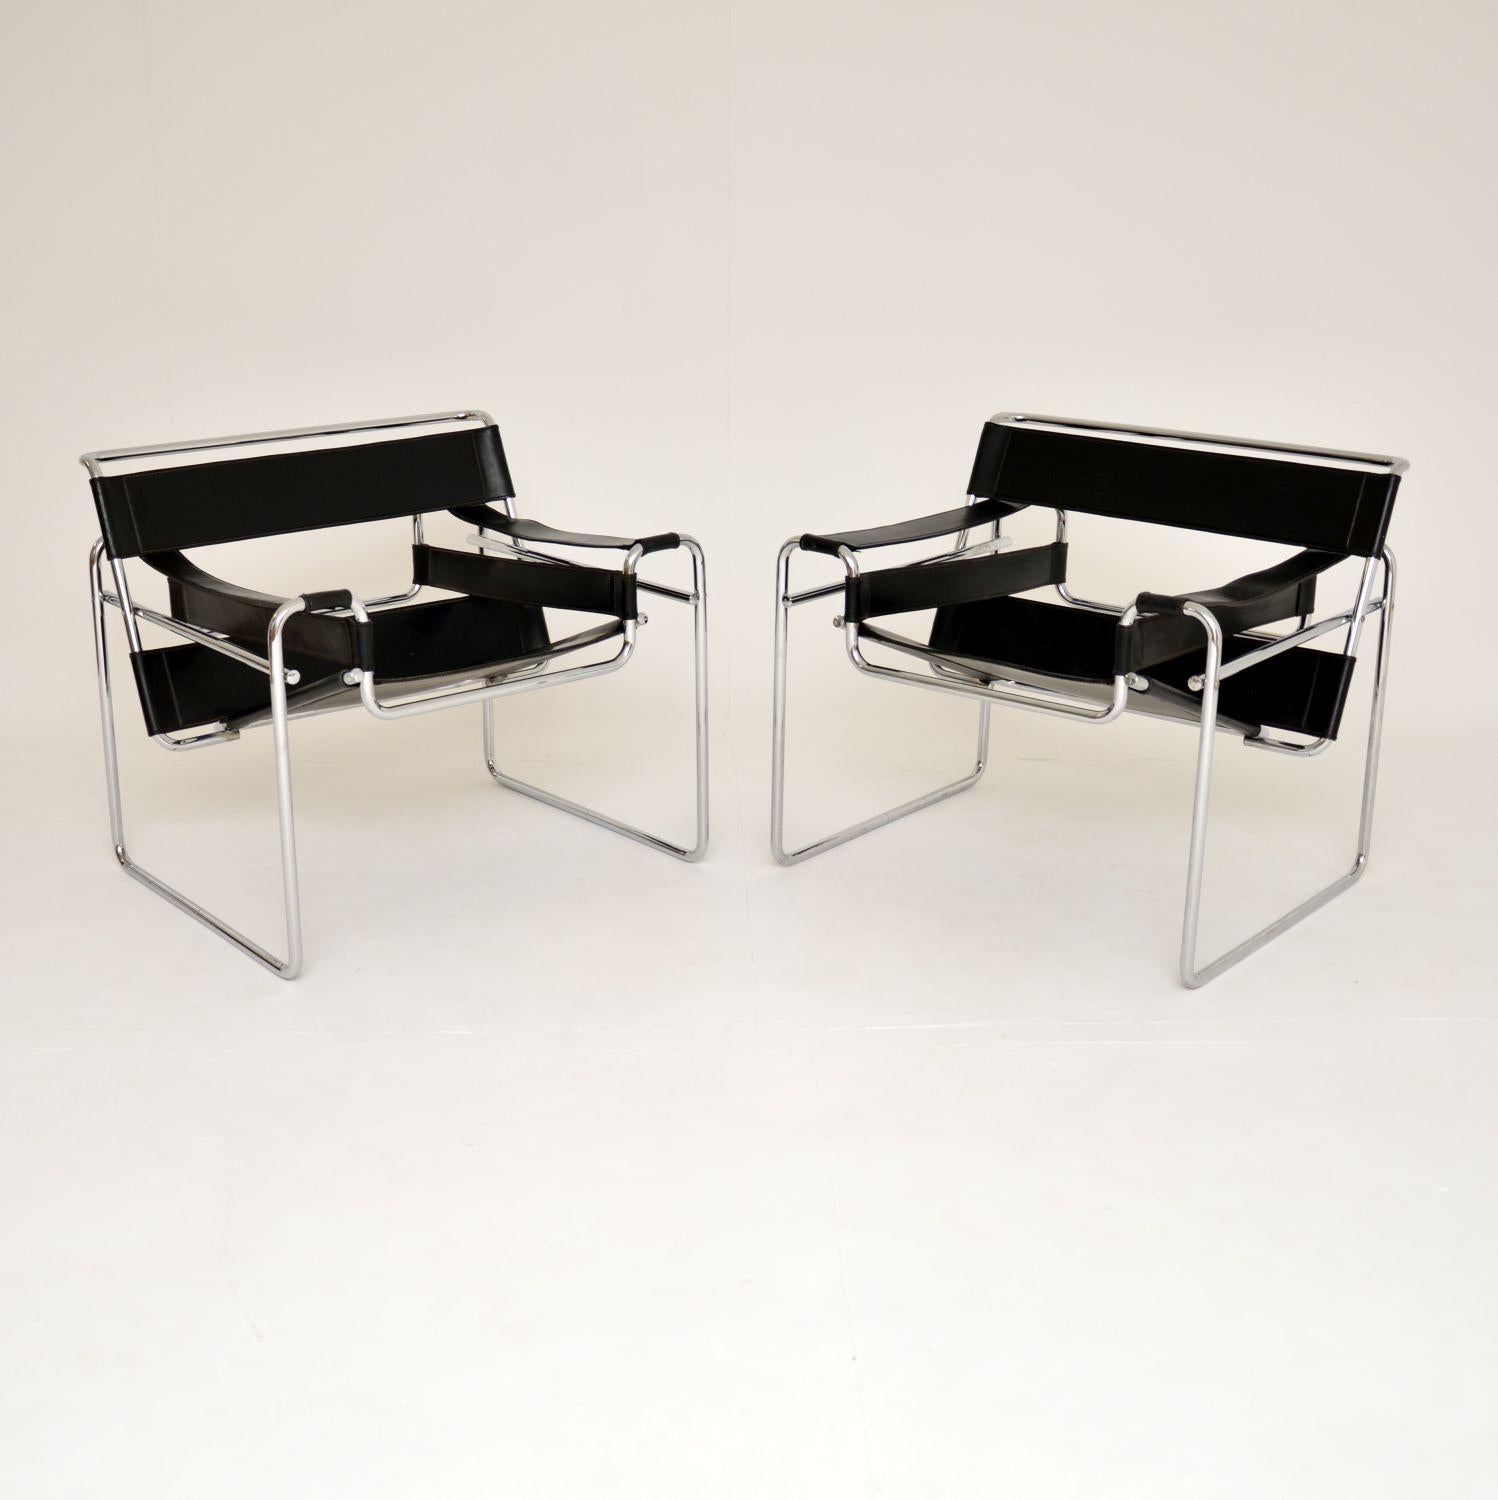 An iconic and extremely stylish pair of genuine Wassily chairs, originally designed by Marcel Breuer in 1925. These were made in Italy under licence by Gavina, they date from the 1960-70’s.

The quality is evident, these are much better than the